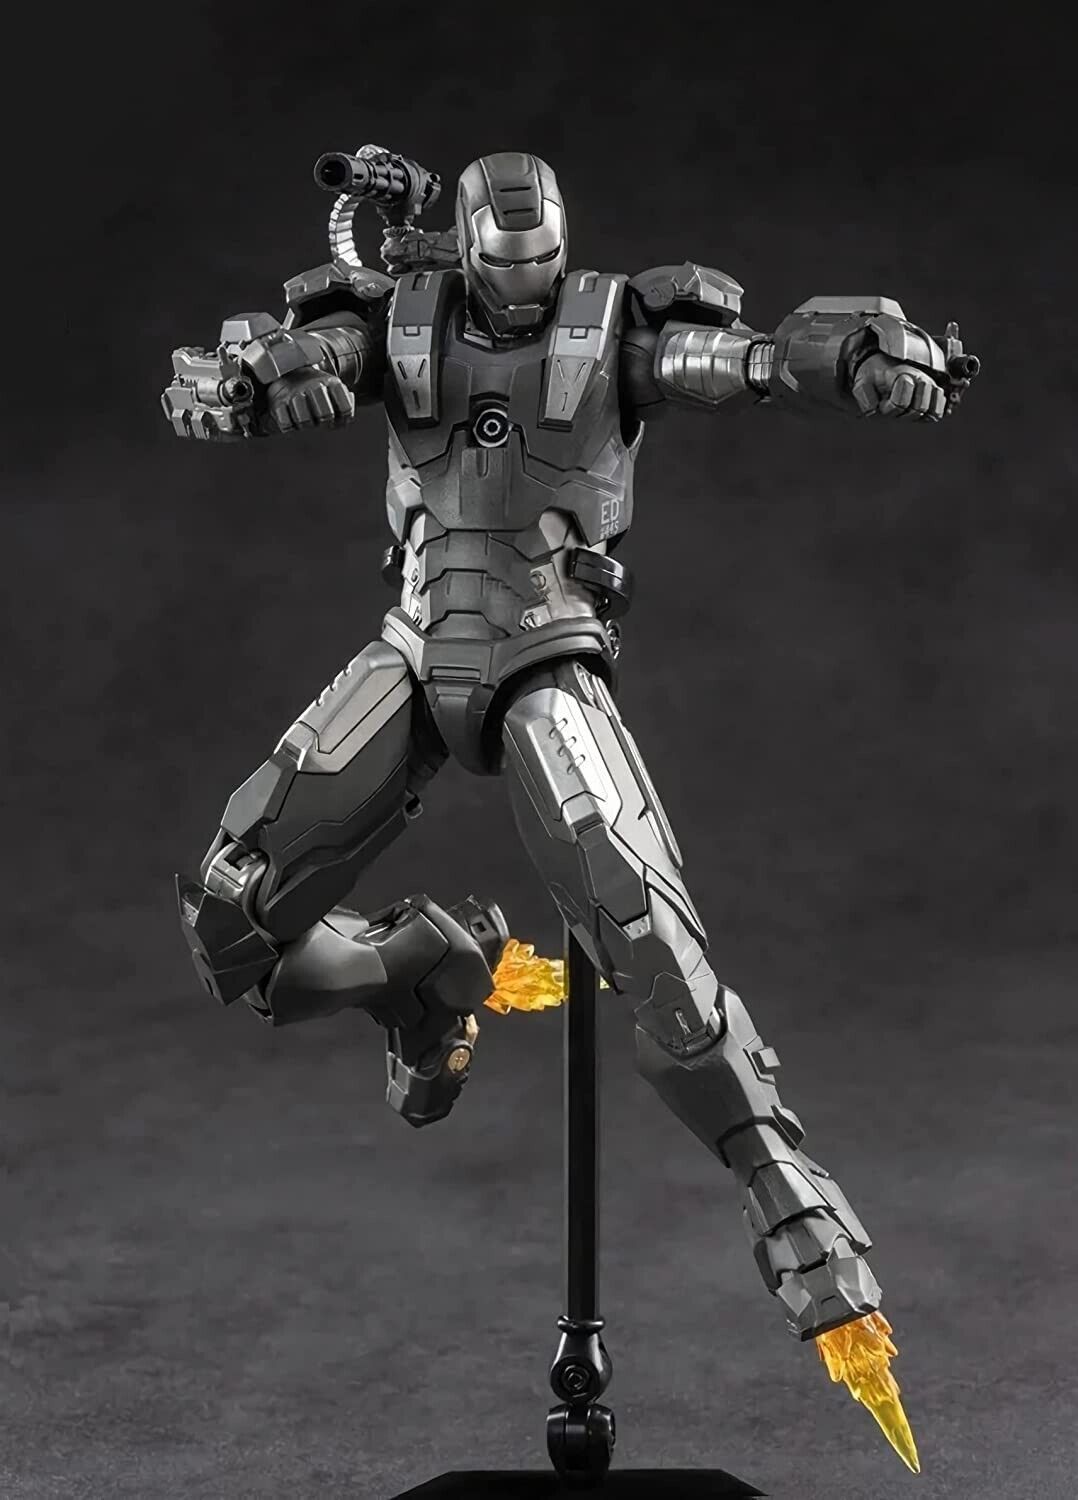 Limited Edition ZDToys War Machine Mark 1 Collectible Figure - 7 Inch GREAT GIFT